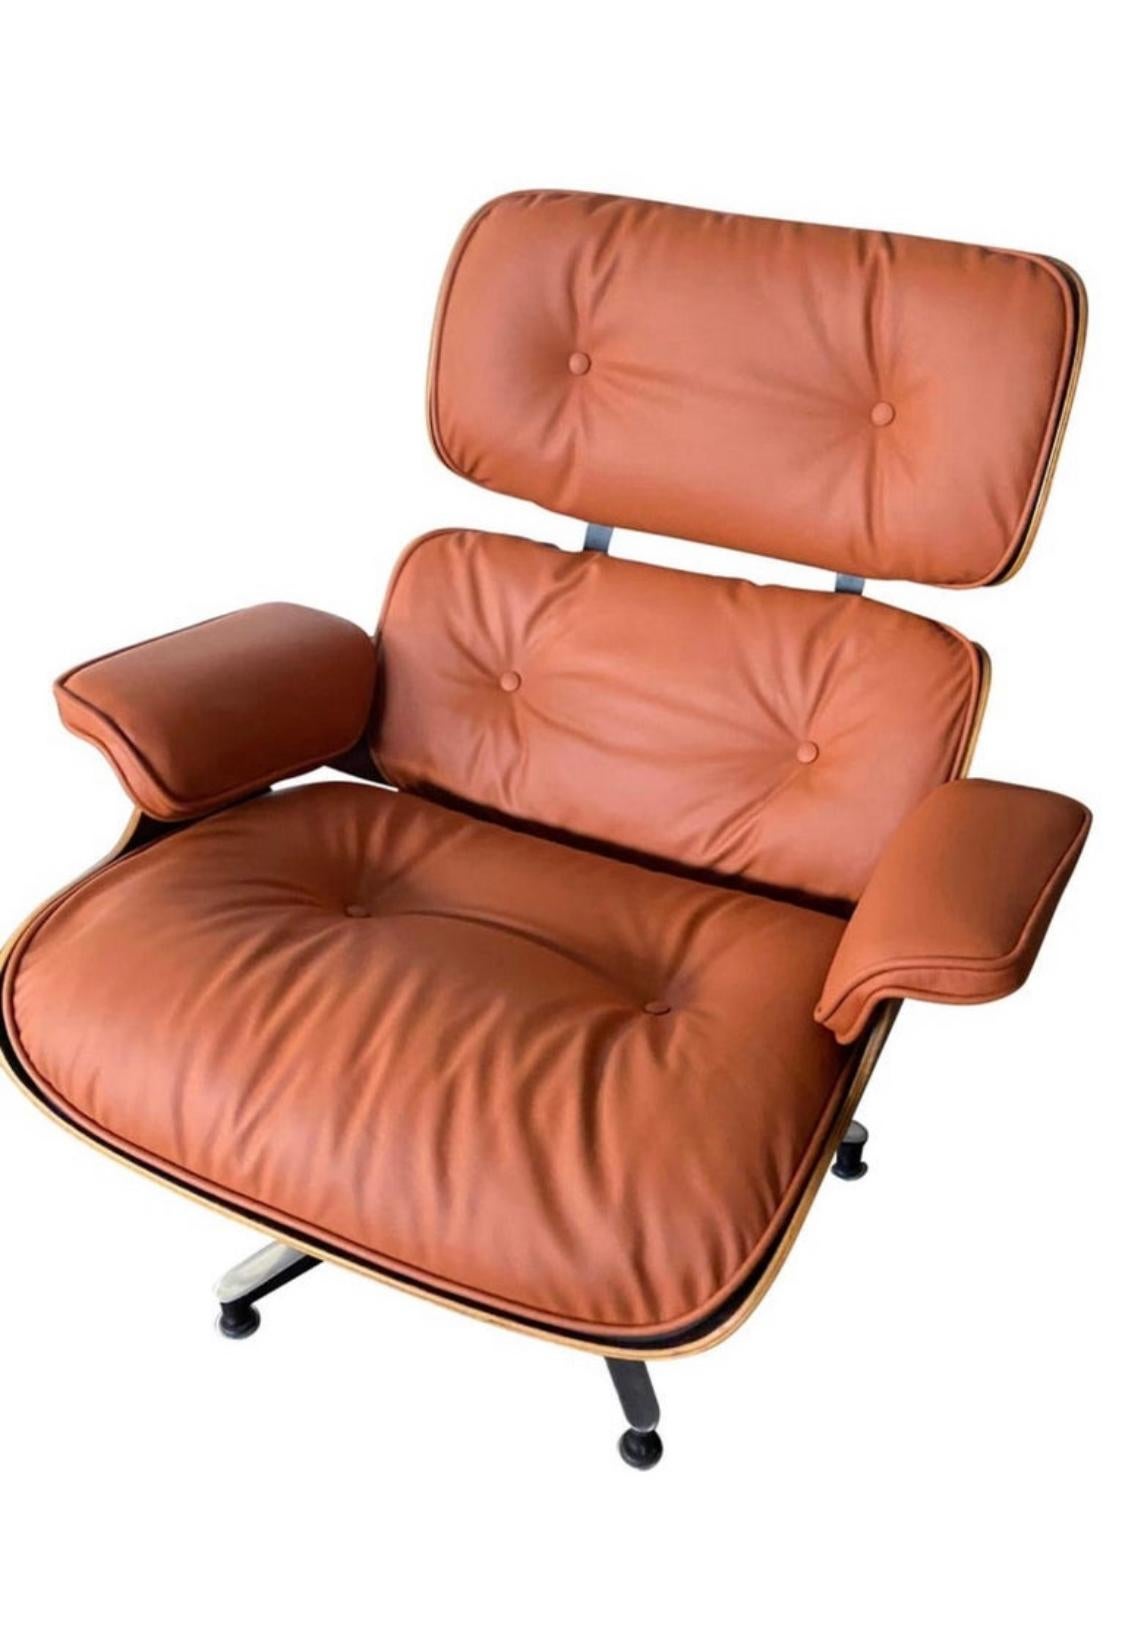 Beautiful custom edition of the iconic Eames lounge chair and ottoman. Rosewood shells have been restored and cradle the custom burnt orange leather cushions. New leather very soft and made to order (3-4 week production period). . Chair signed and